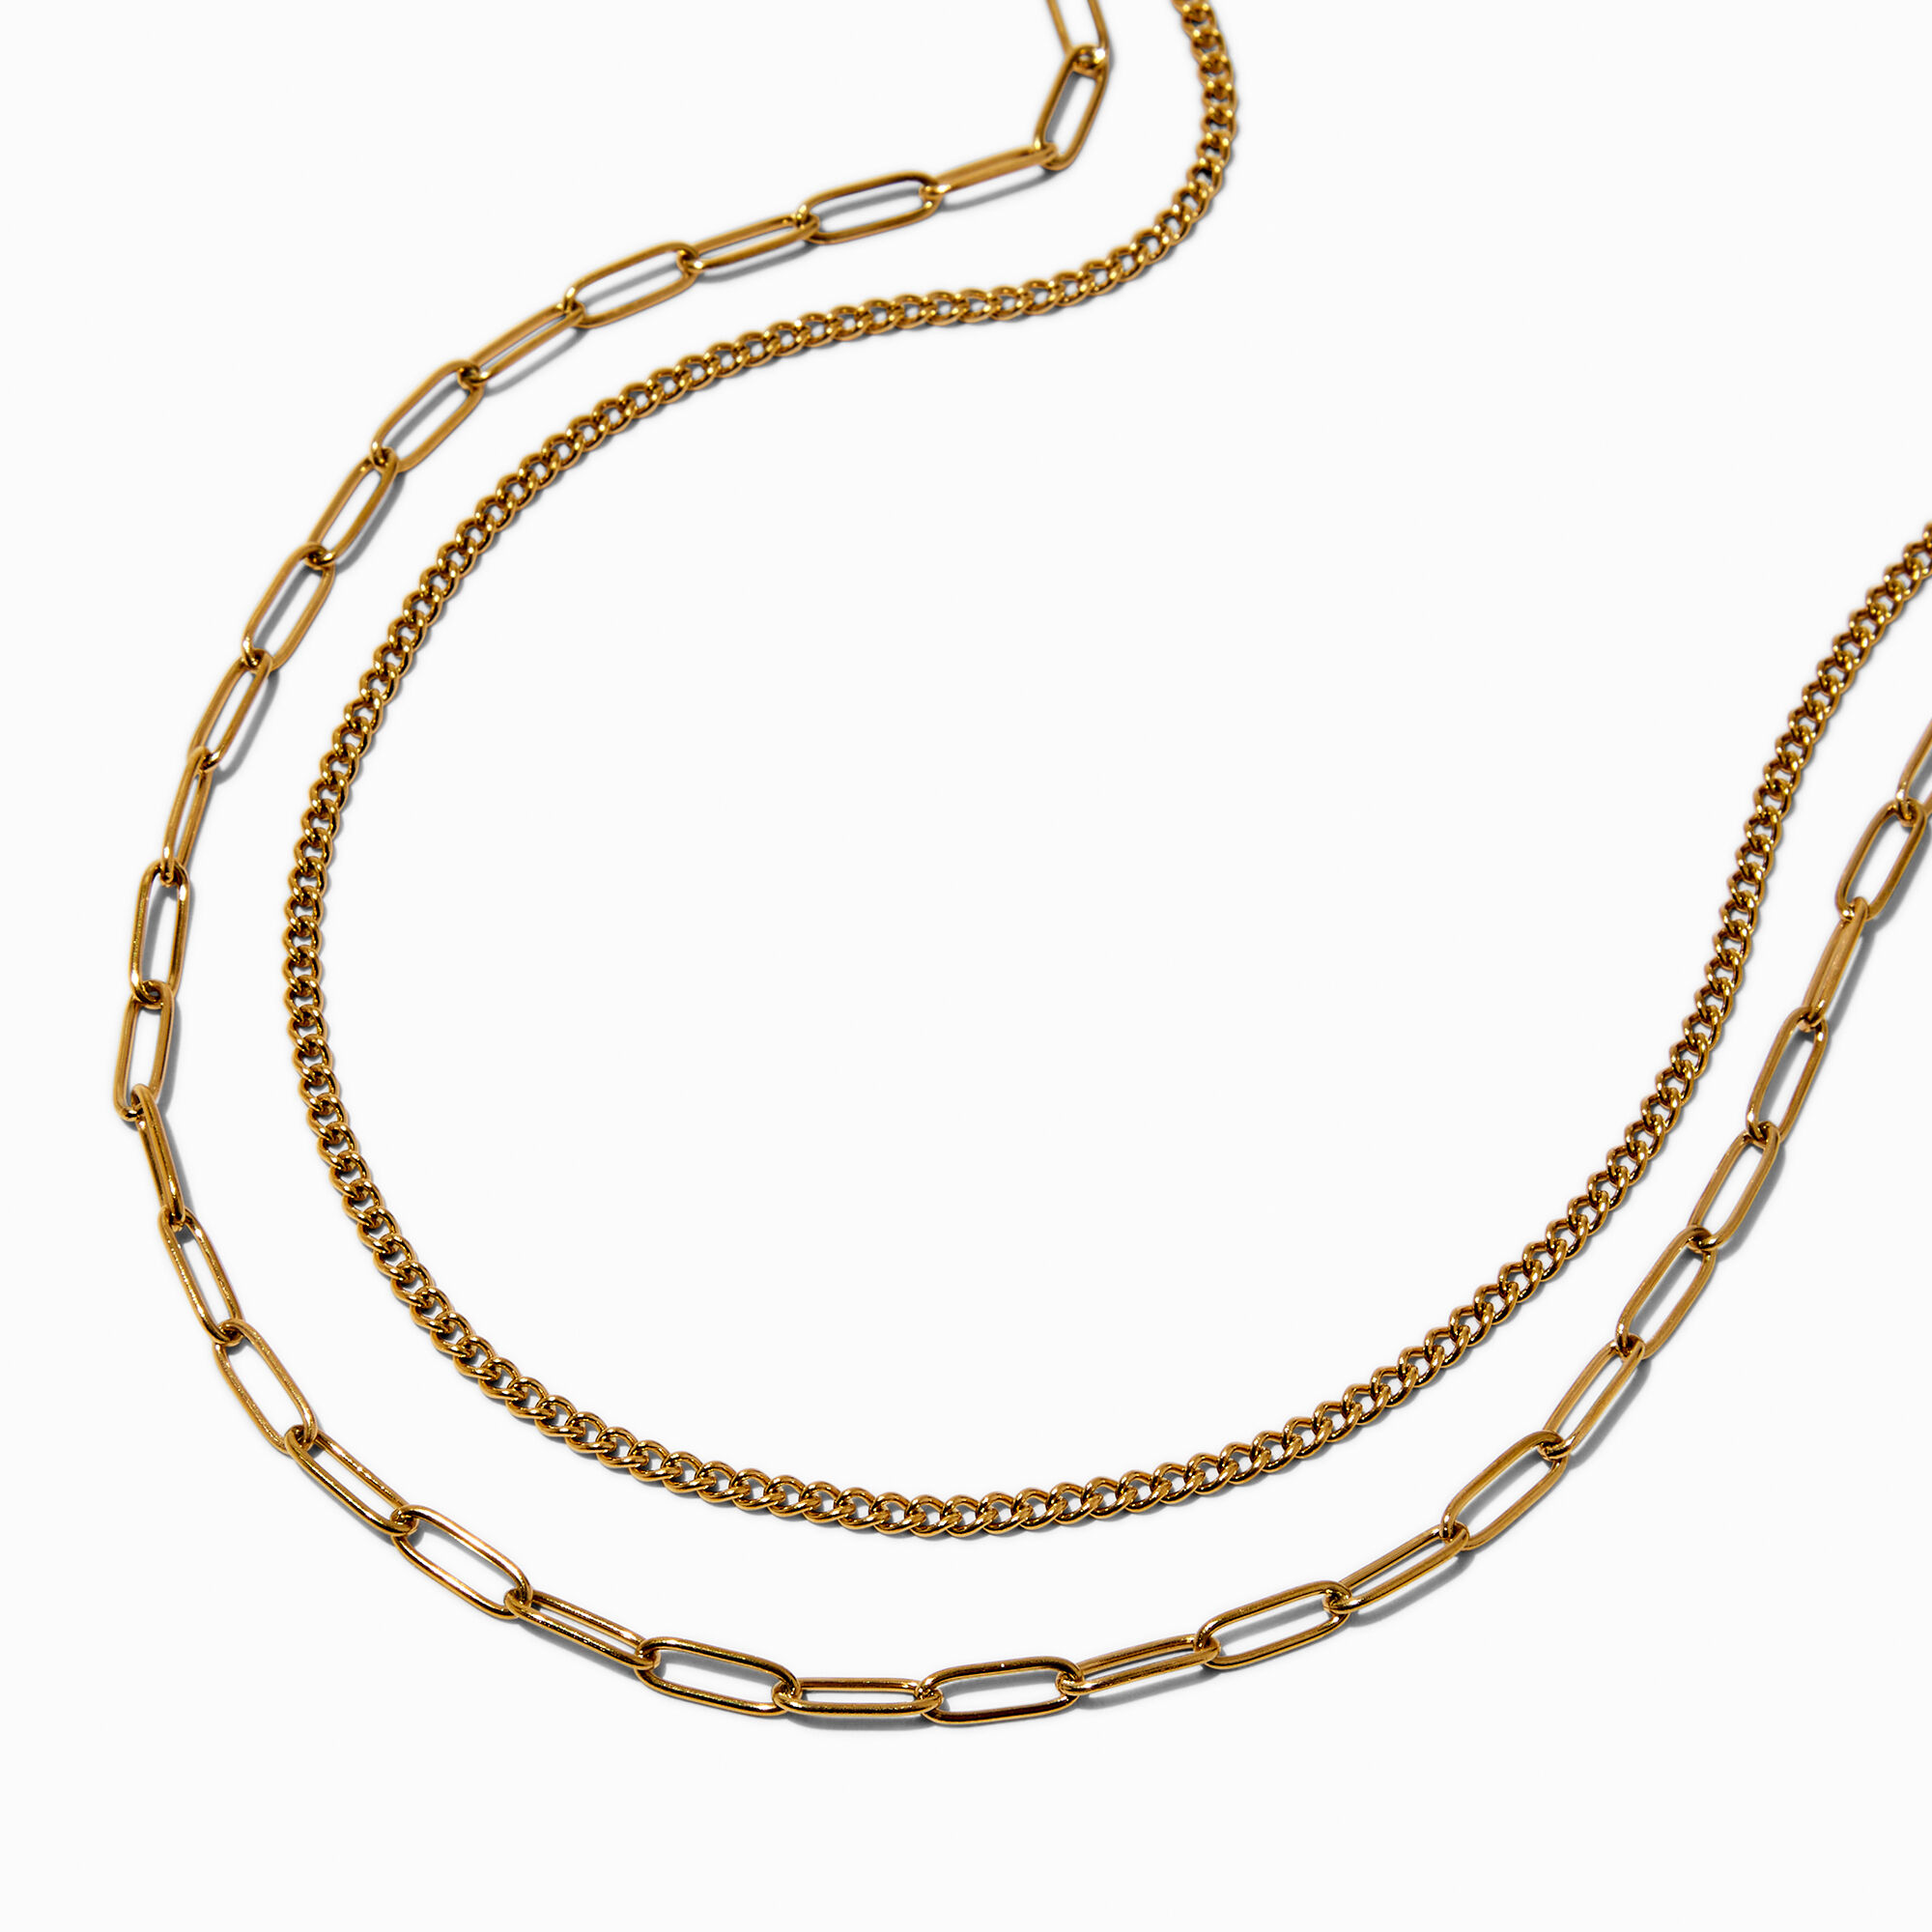 View Claires Tone Stainless Steel Curb Paperclip Chain Necklaces 2 Pack Gold information